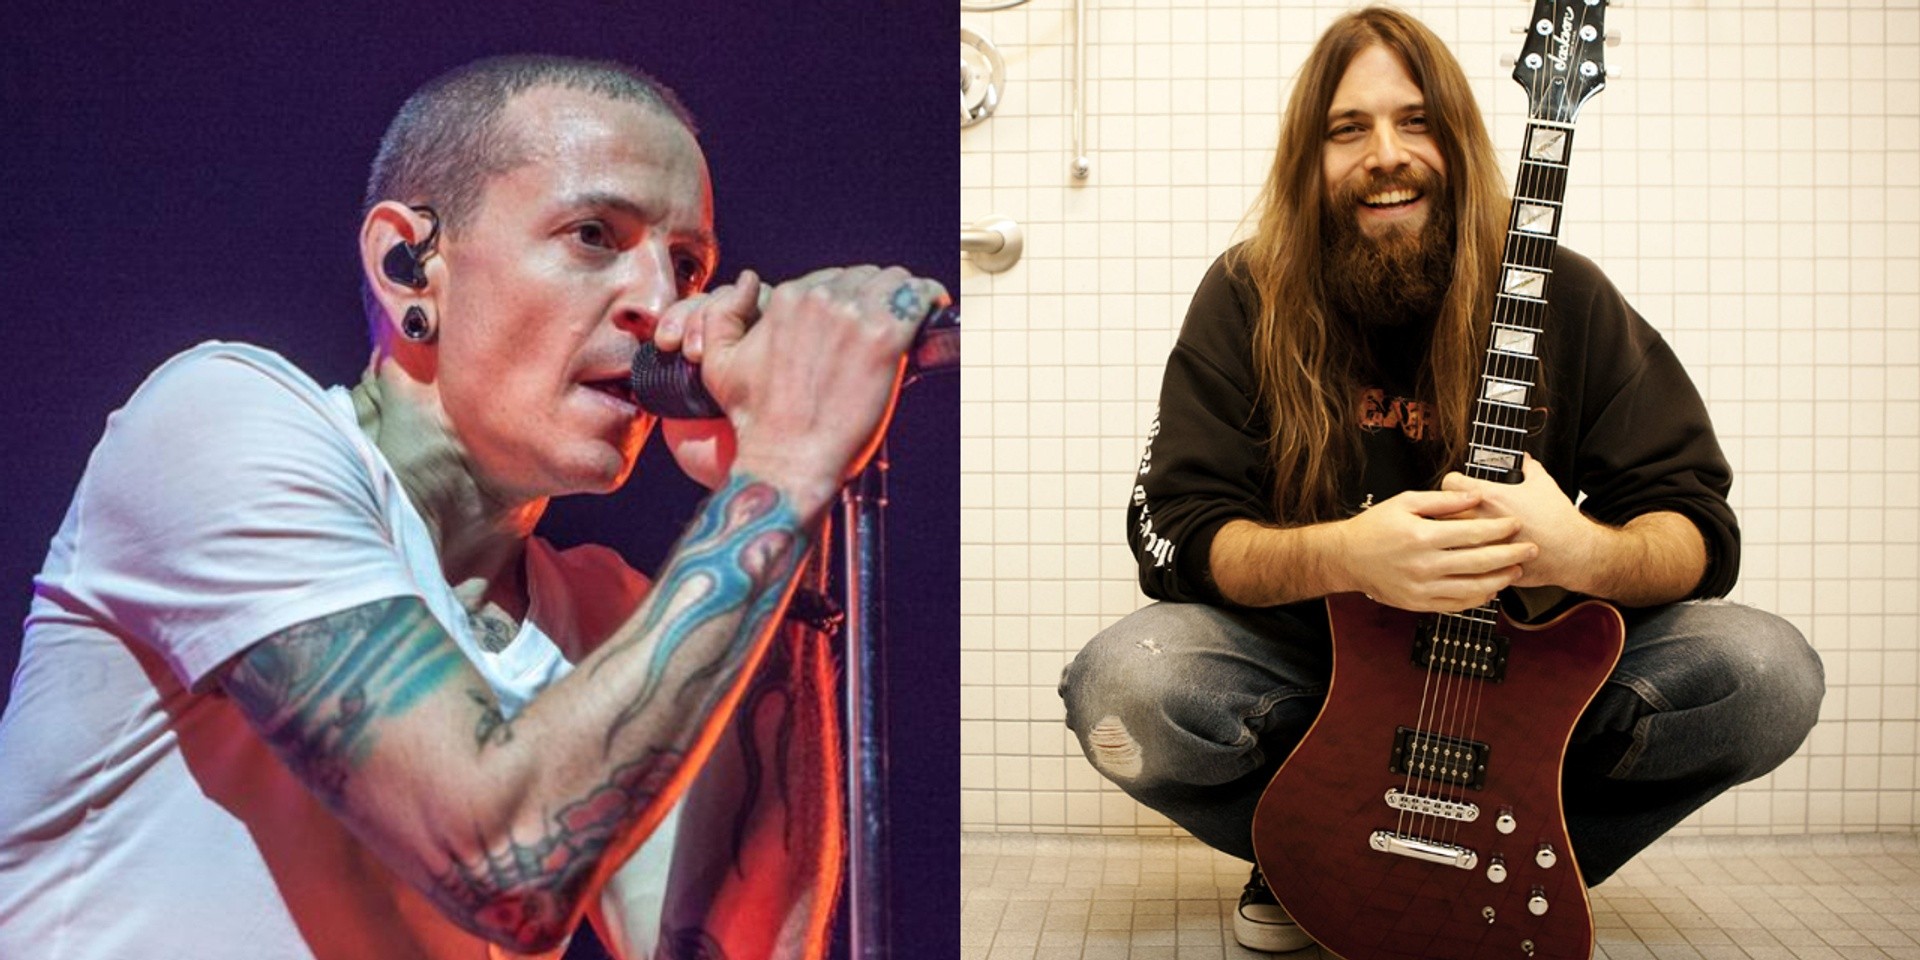 Mark Morton releases long-awaited track with Chester Bennington, features members of Trivium – listen